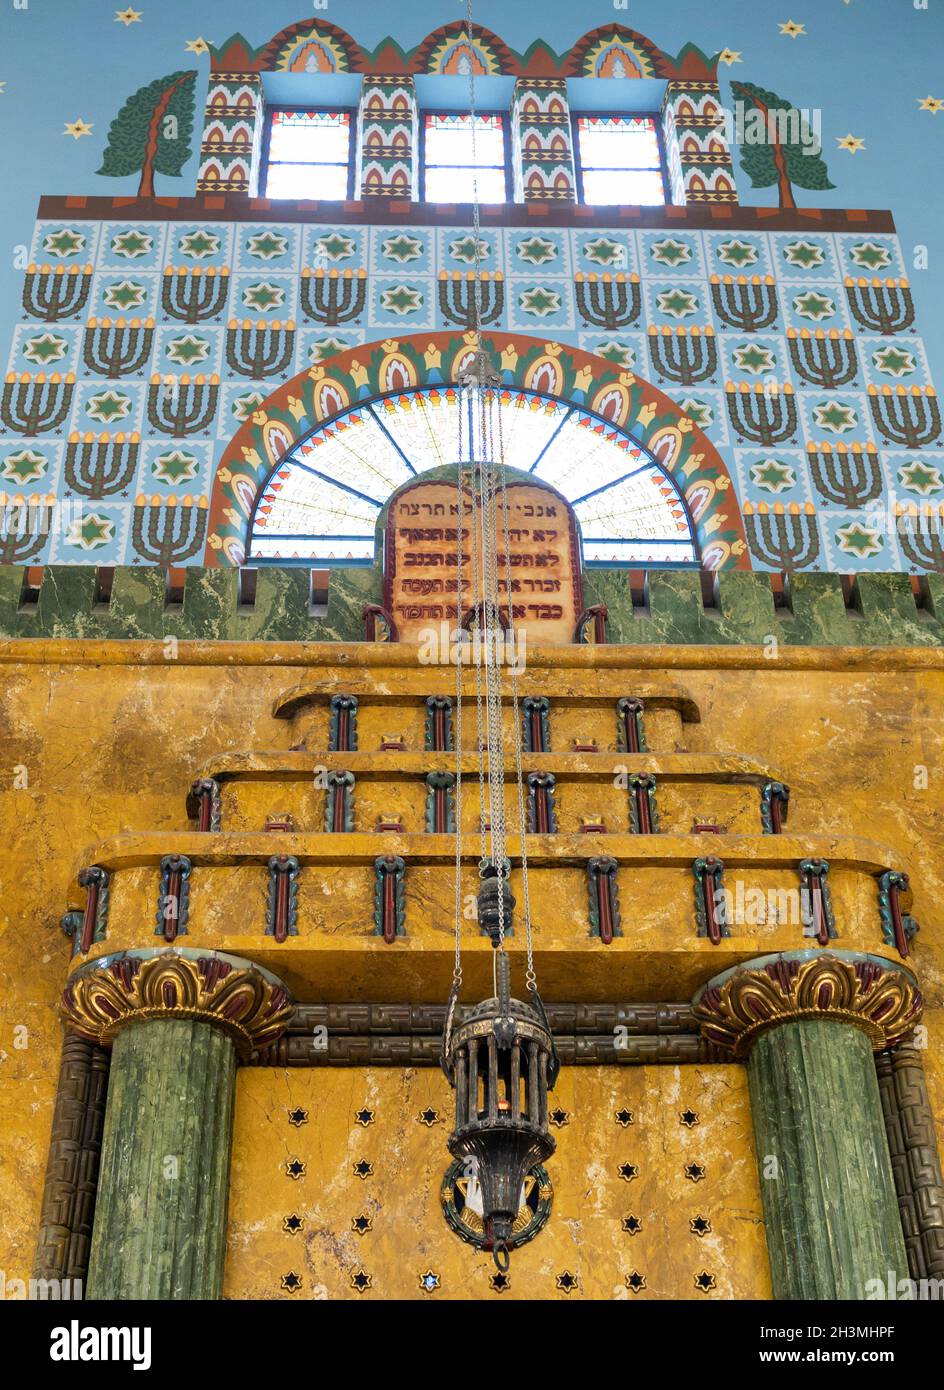 Eternal Light at Kazinczy Street Orthodox Synagogue: The eternal light above the Torah and the eastern wall of the Kazinczy Street Orthodox Synagogue. Stock Photo